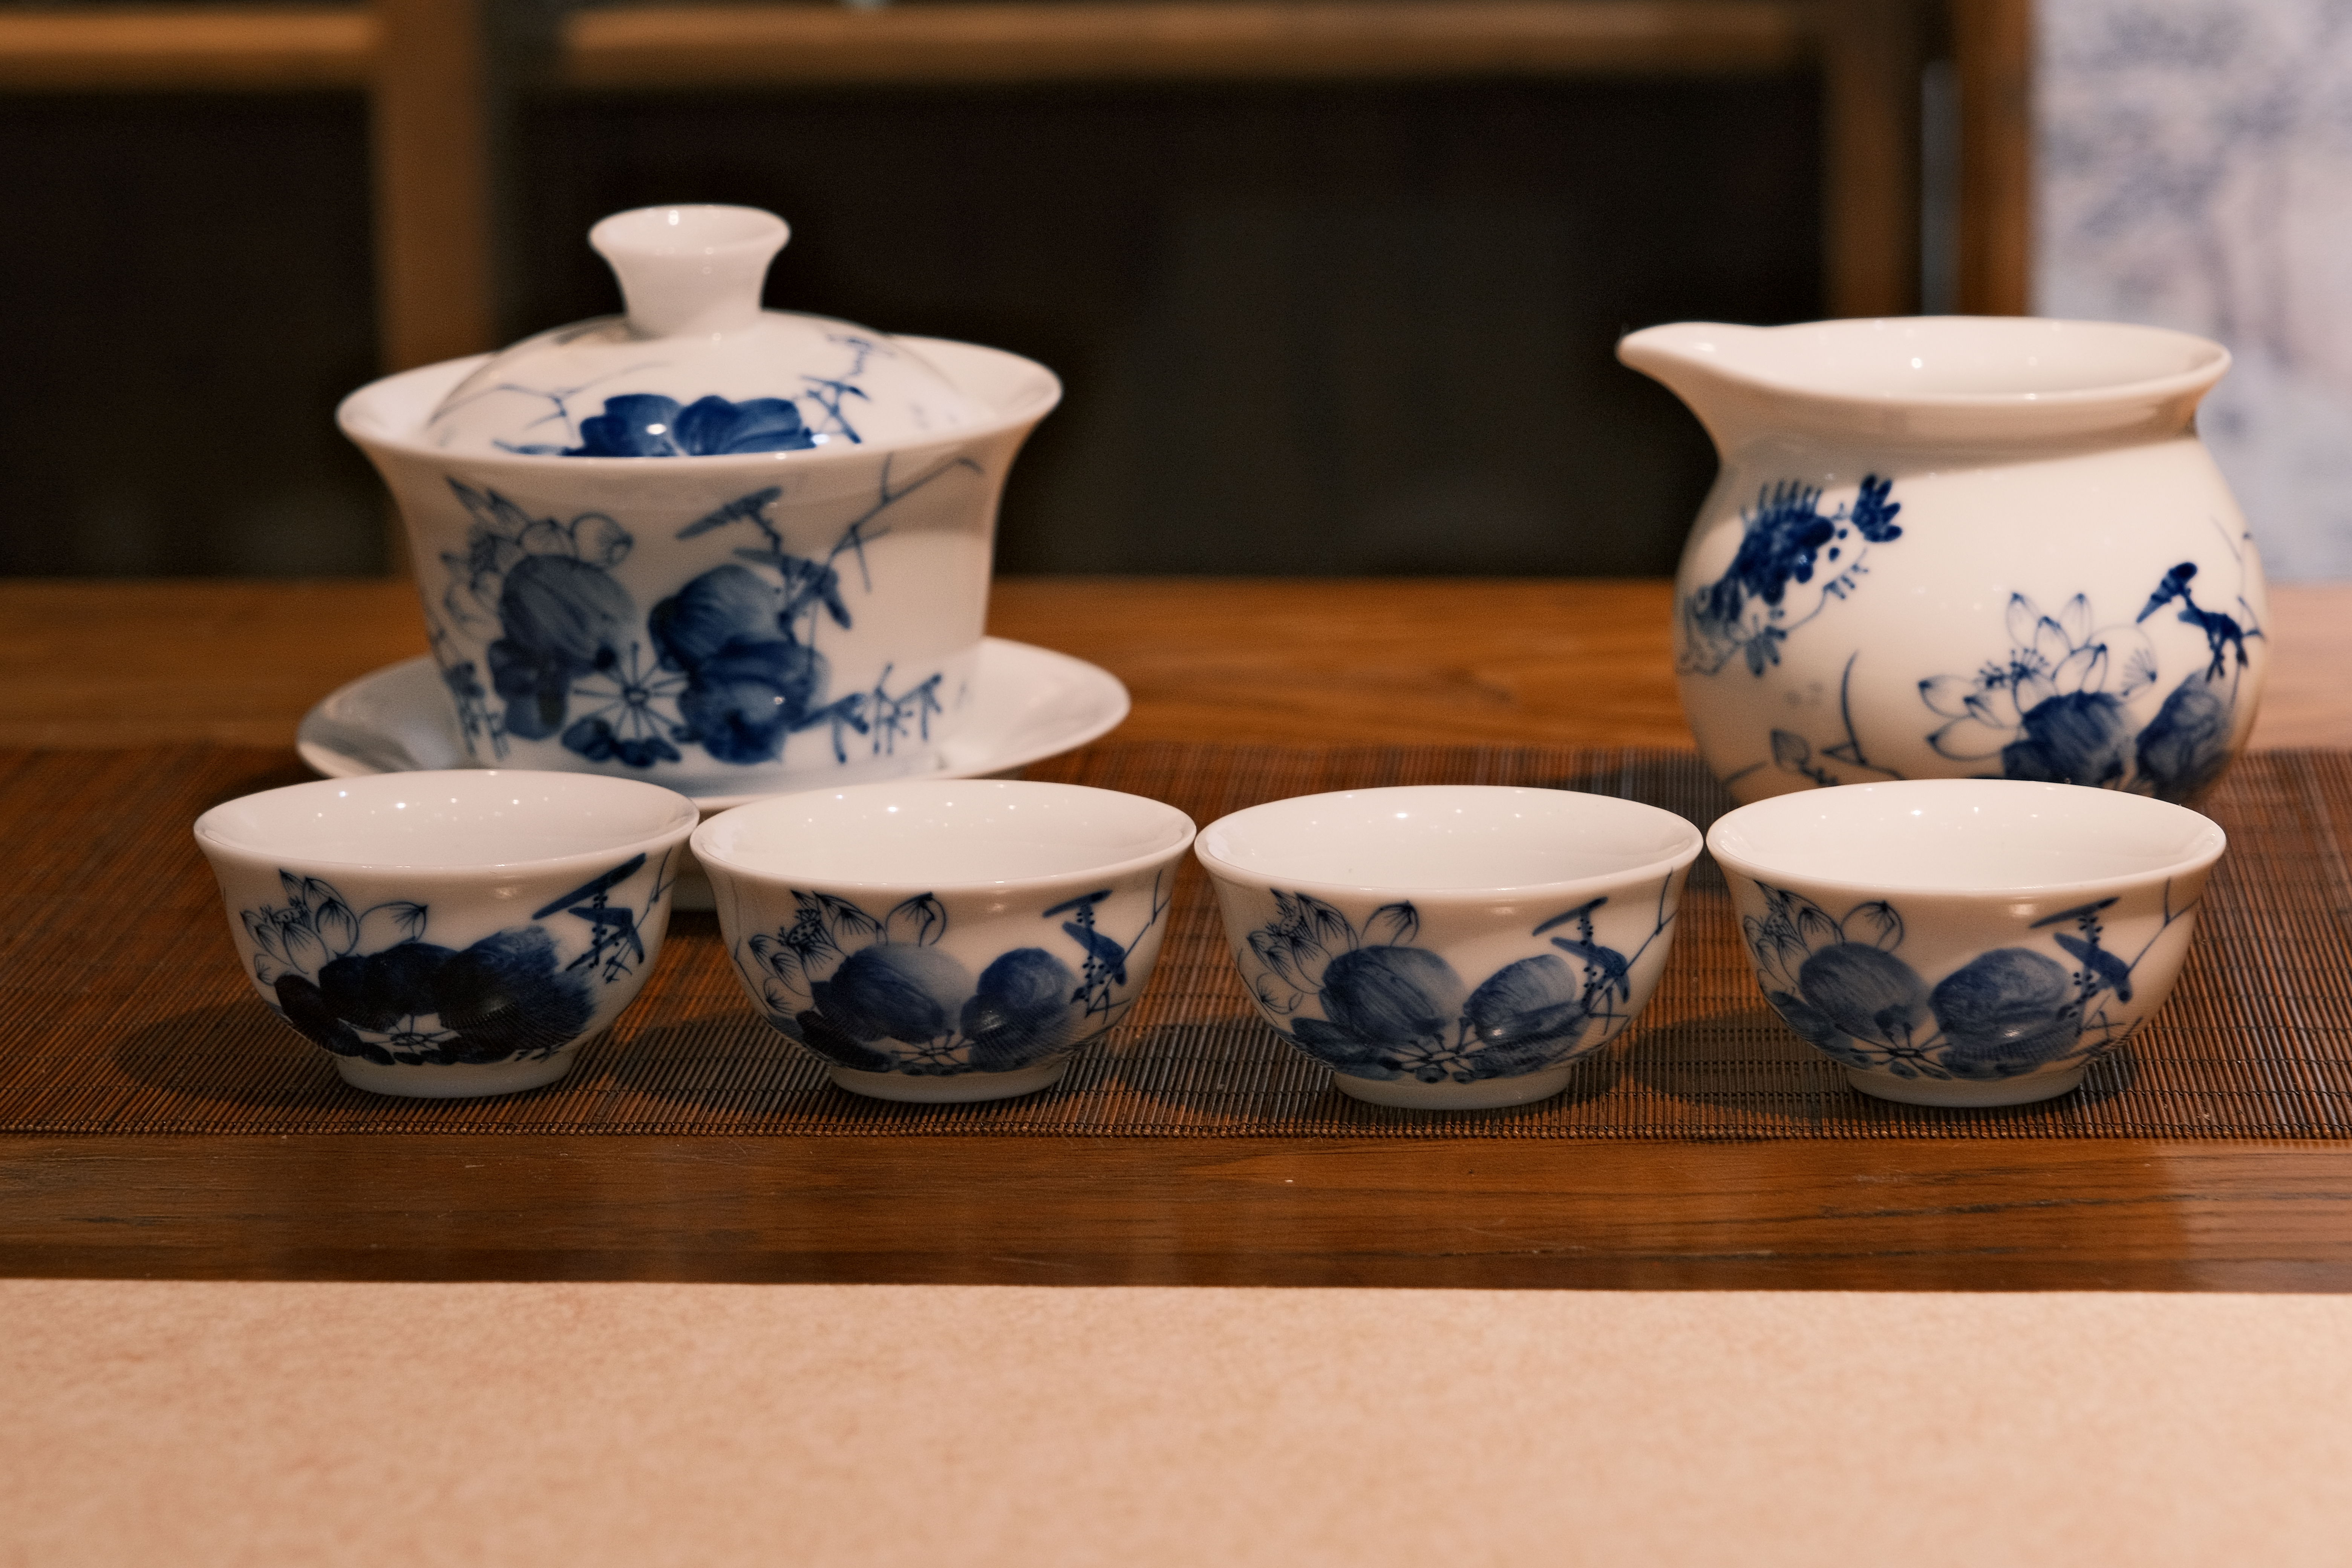 A blue and white porcelain tea set made in Jingdezhen, China's 